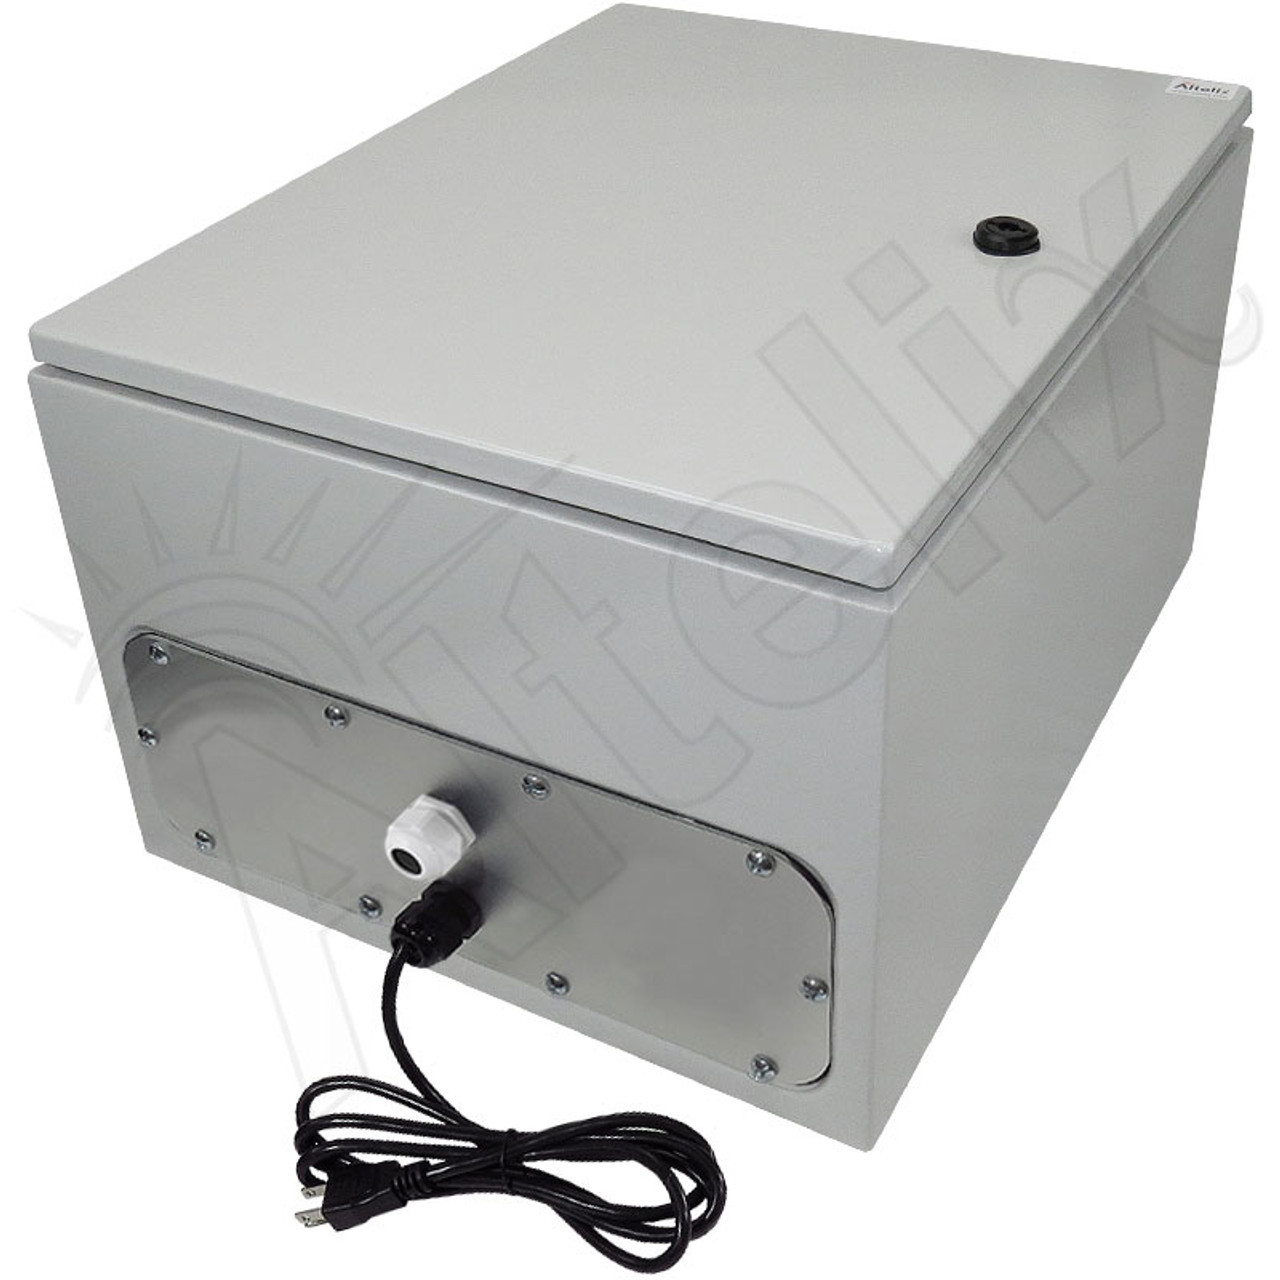 Altelix 20x16x12 NEMA 4X Steel Weatherproof Enclosure with 120 VAC Outlets  and Power Cord